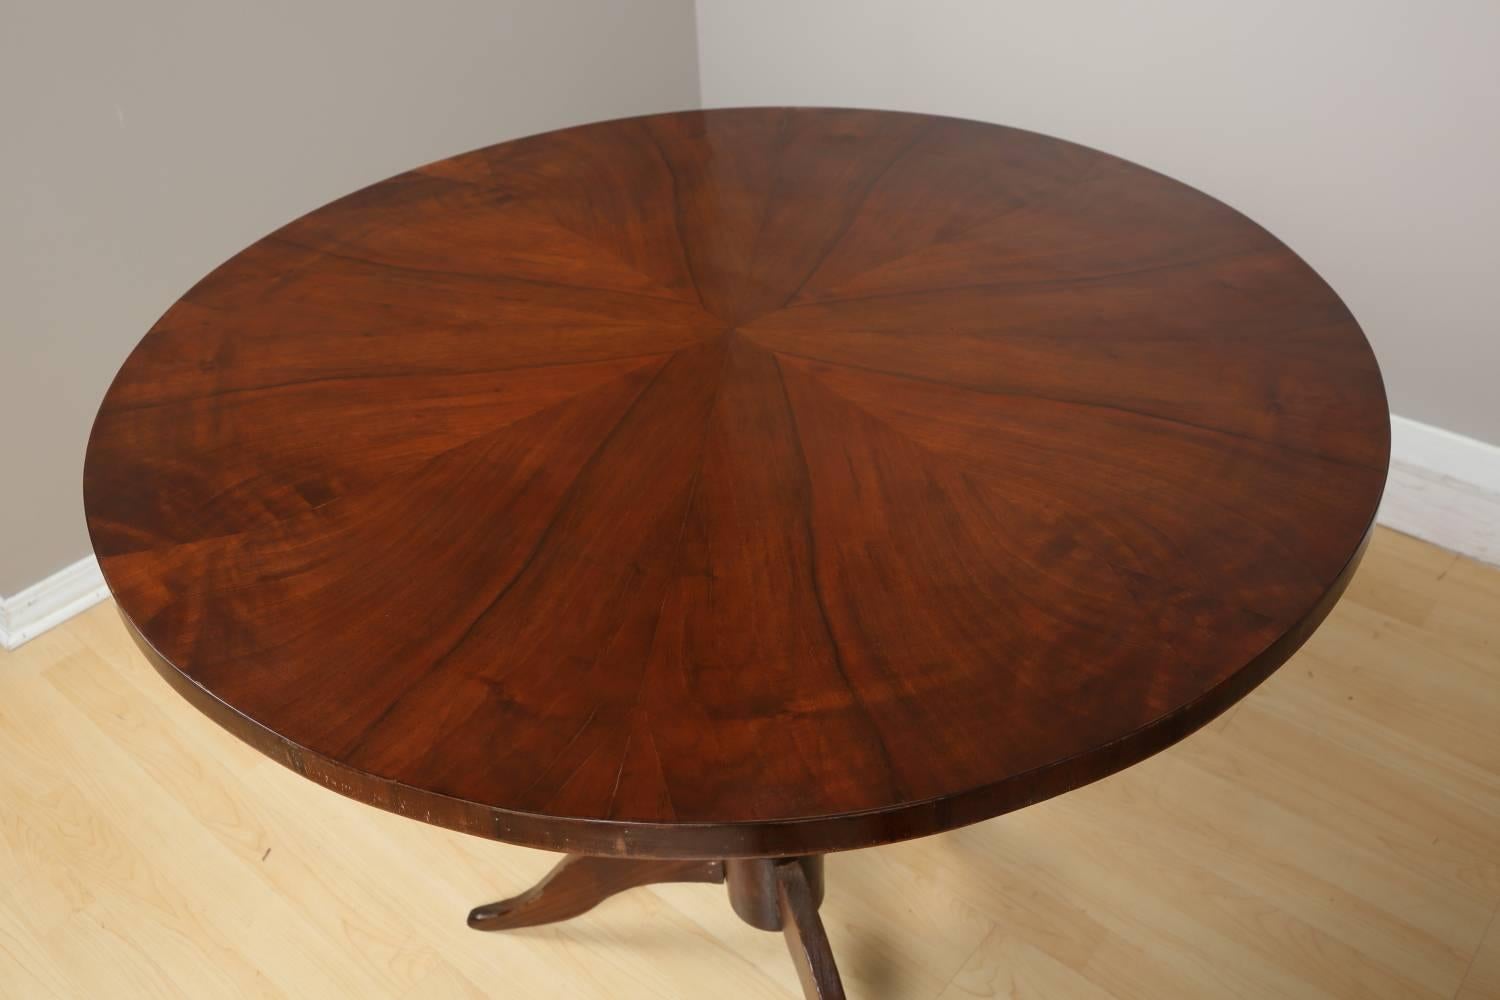 Biedermeier round table in oak, circa 1840. Simple and elegant oak table from Austria Biedermeier period. Very good condition. Great addition to a foyer or study. Complimentary delivery and set up with 100 miles radius from Chicago, IL.